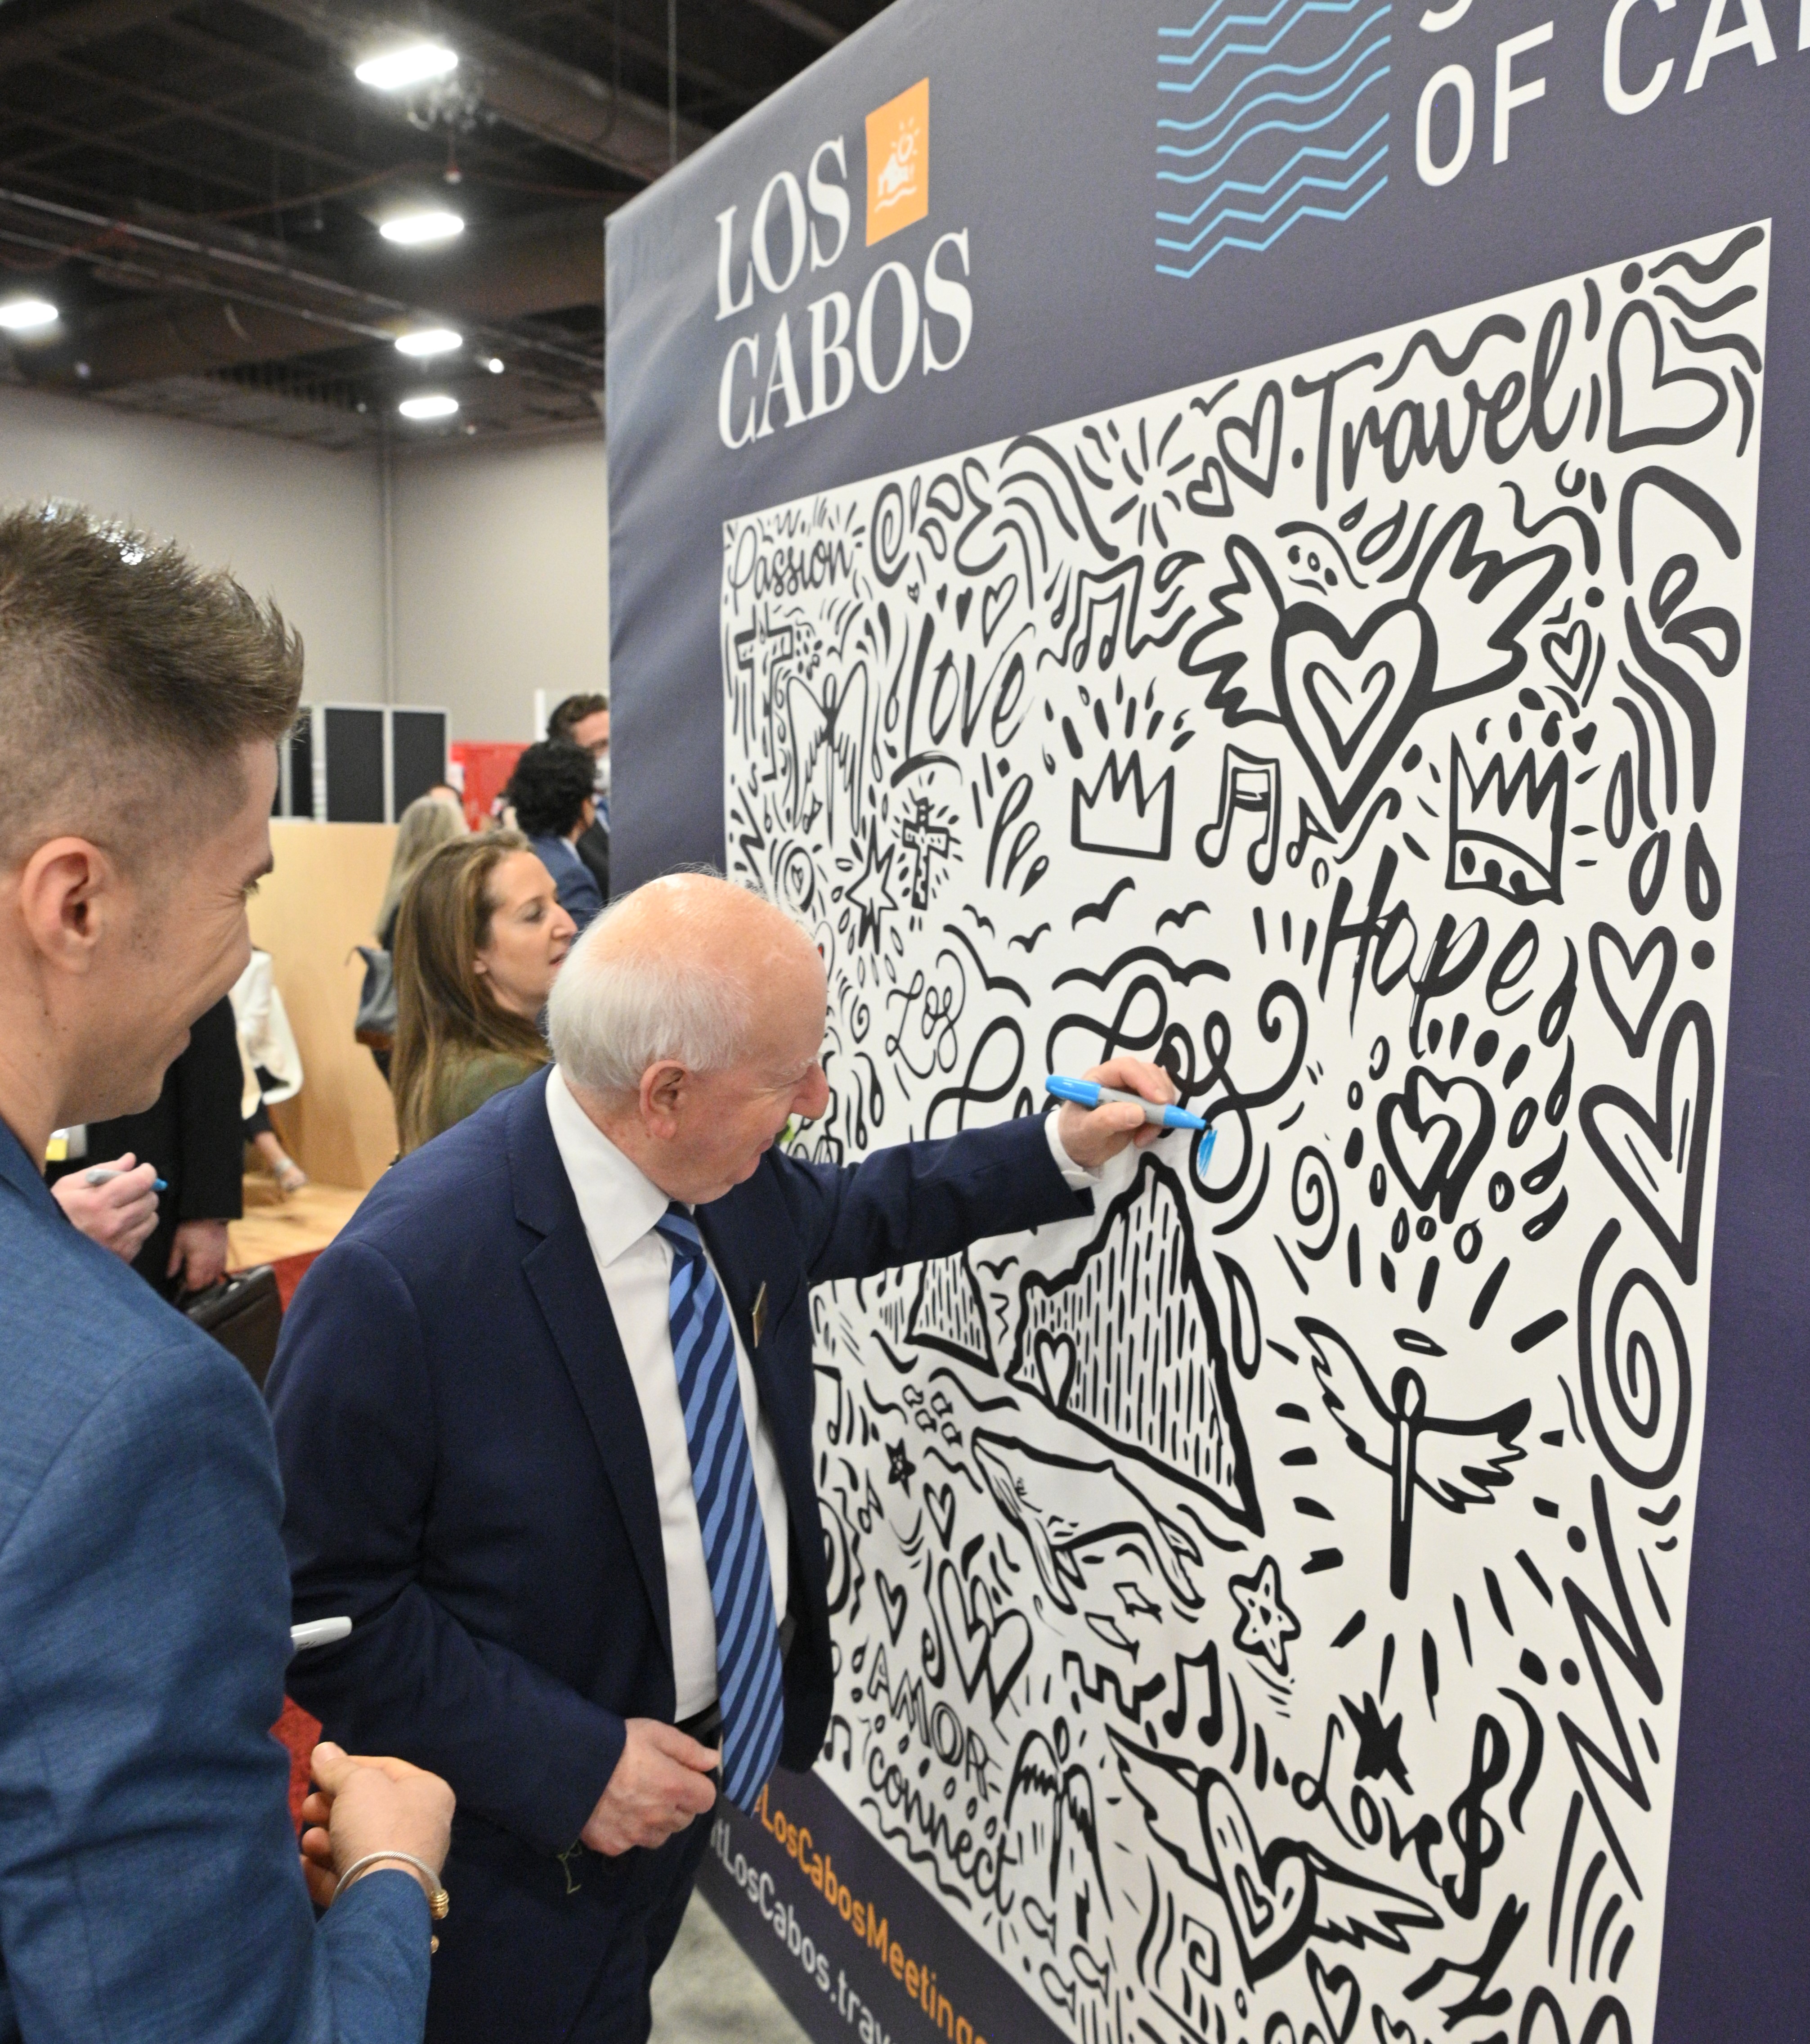 IMEX's Ray Bloom & Carina Bauer color the Los Cabos wall